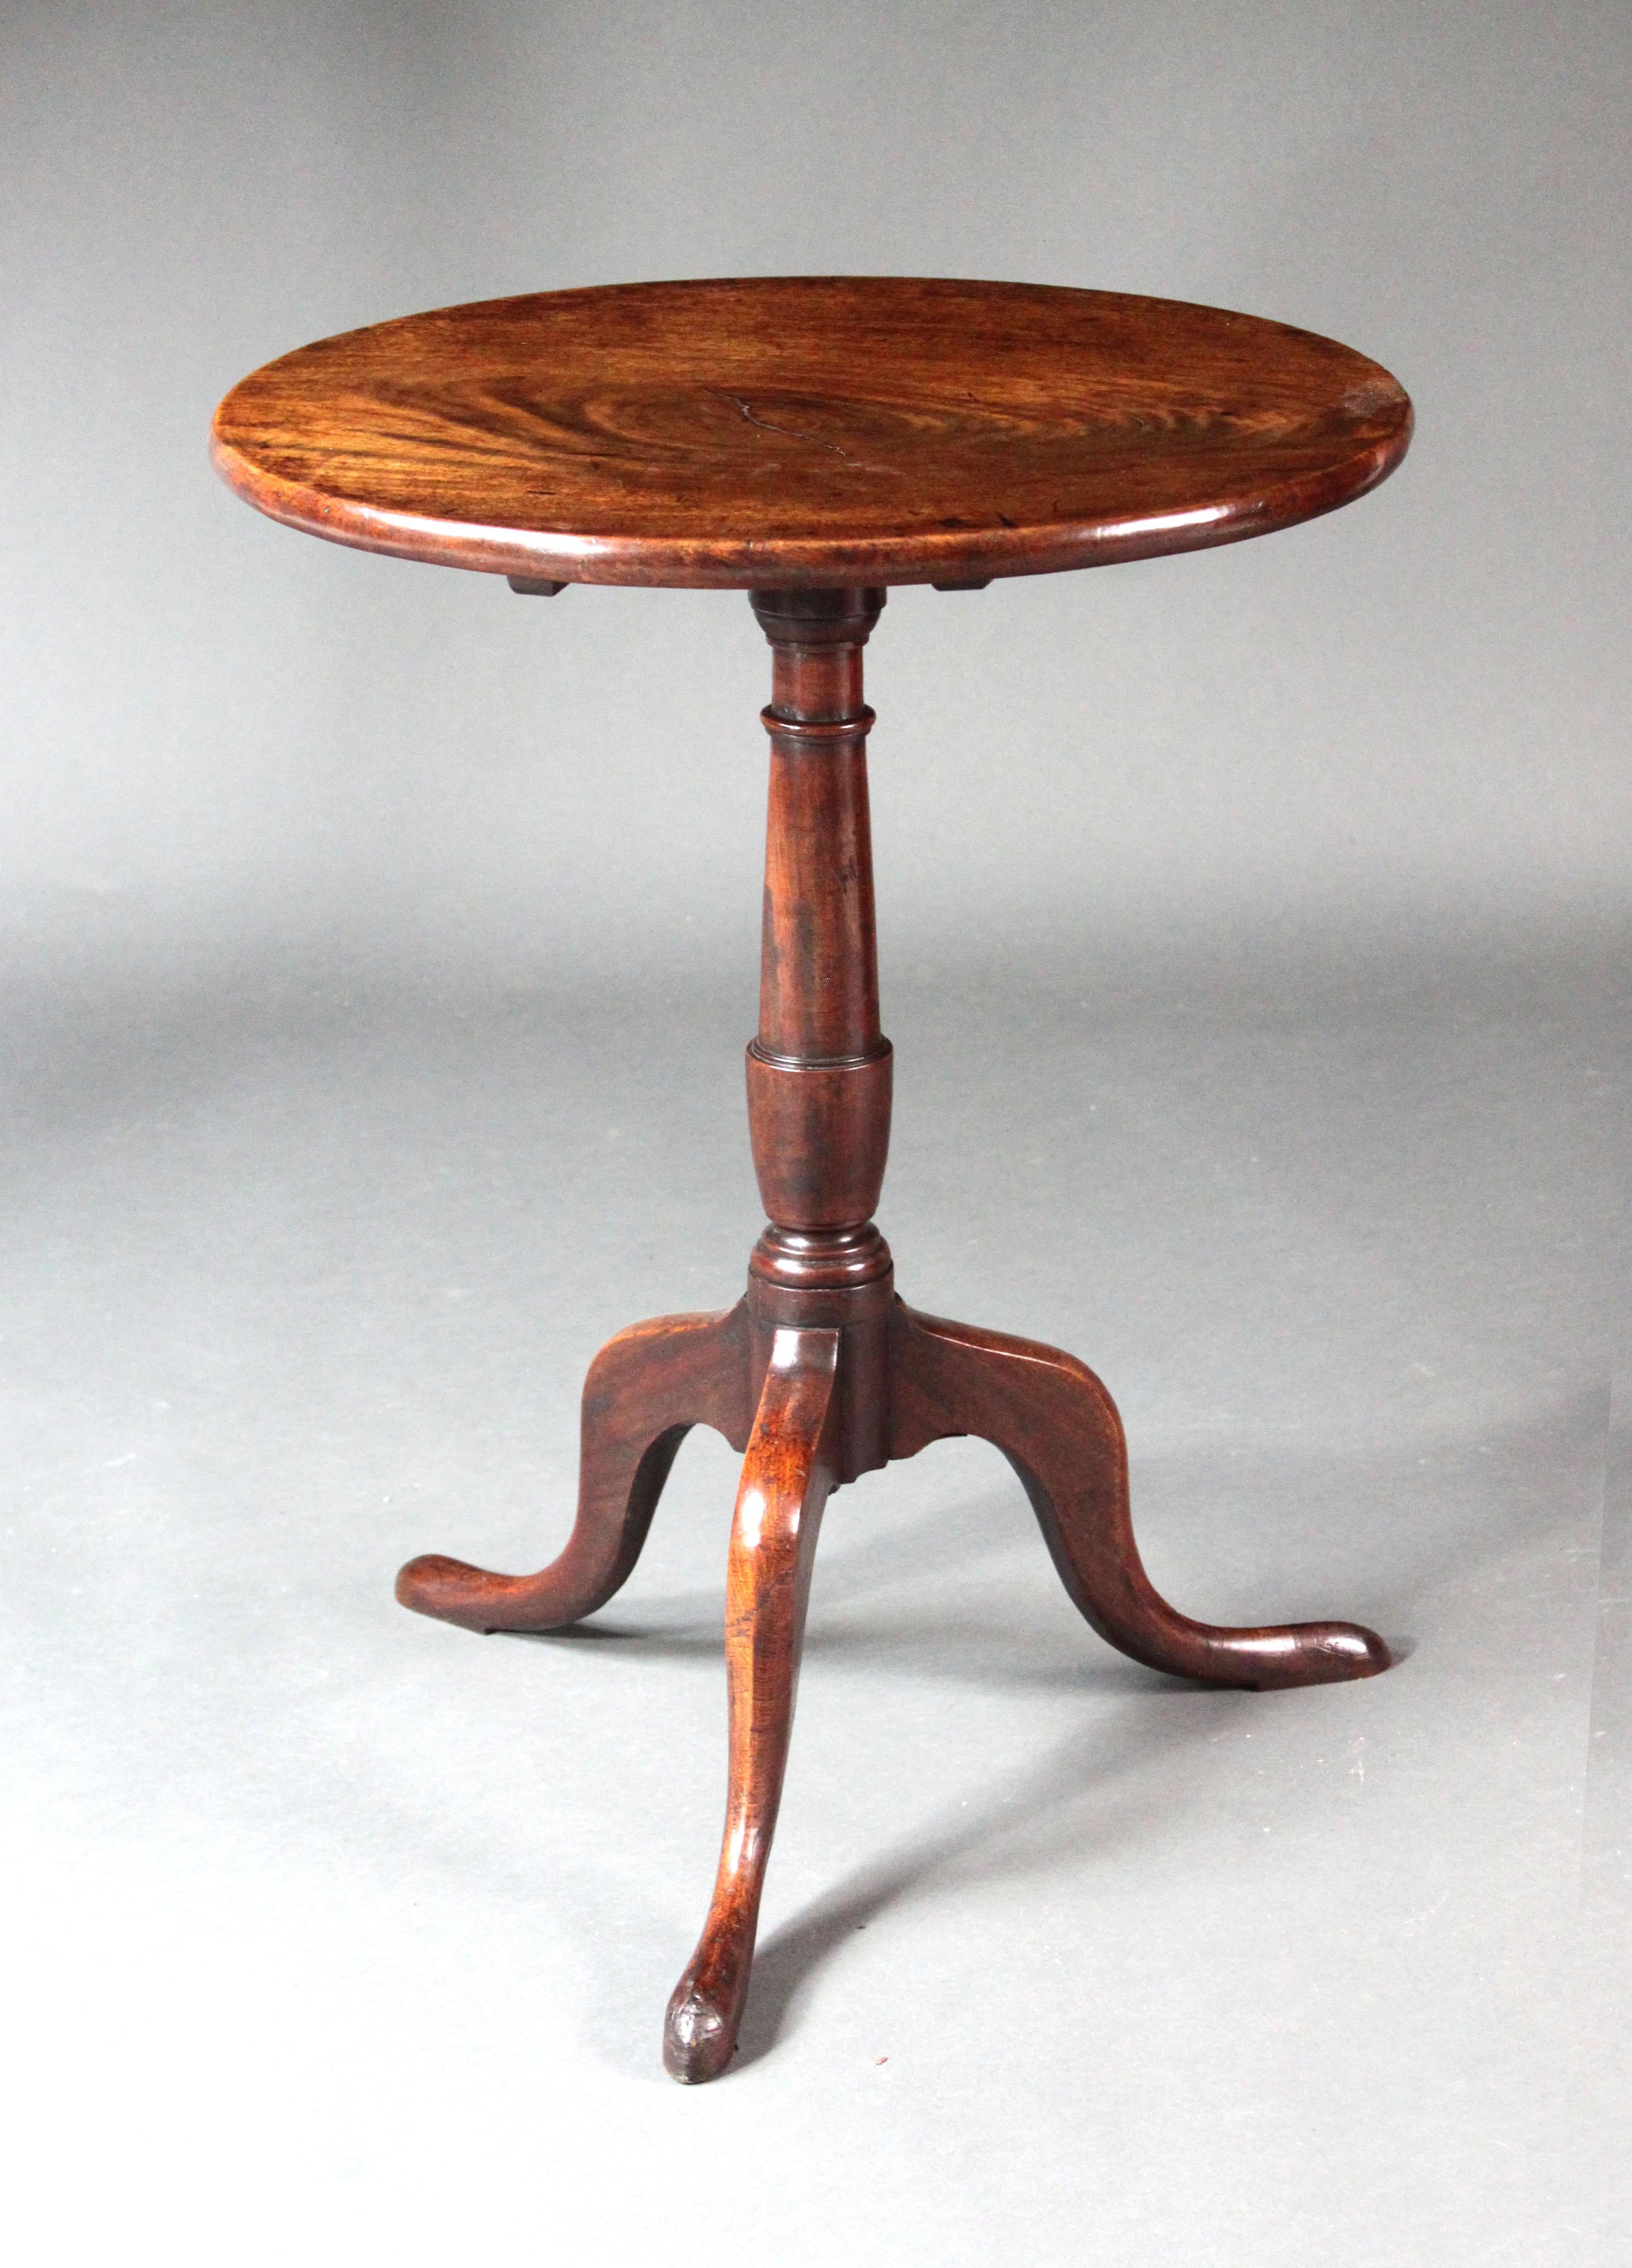 A George III Chippendale period tripod table of a good small size and figured one piece top.